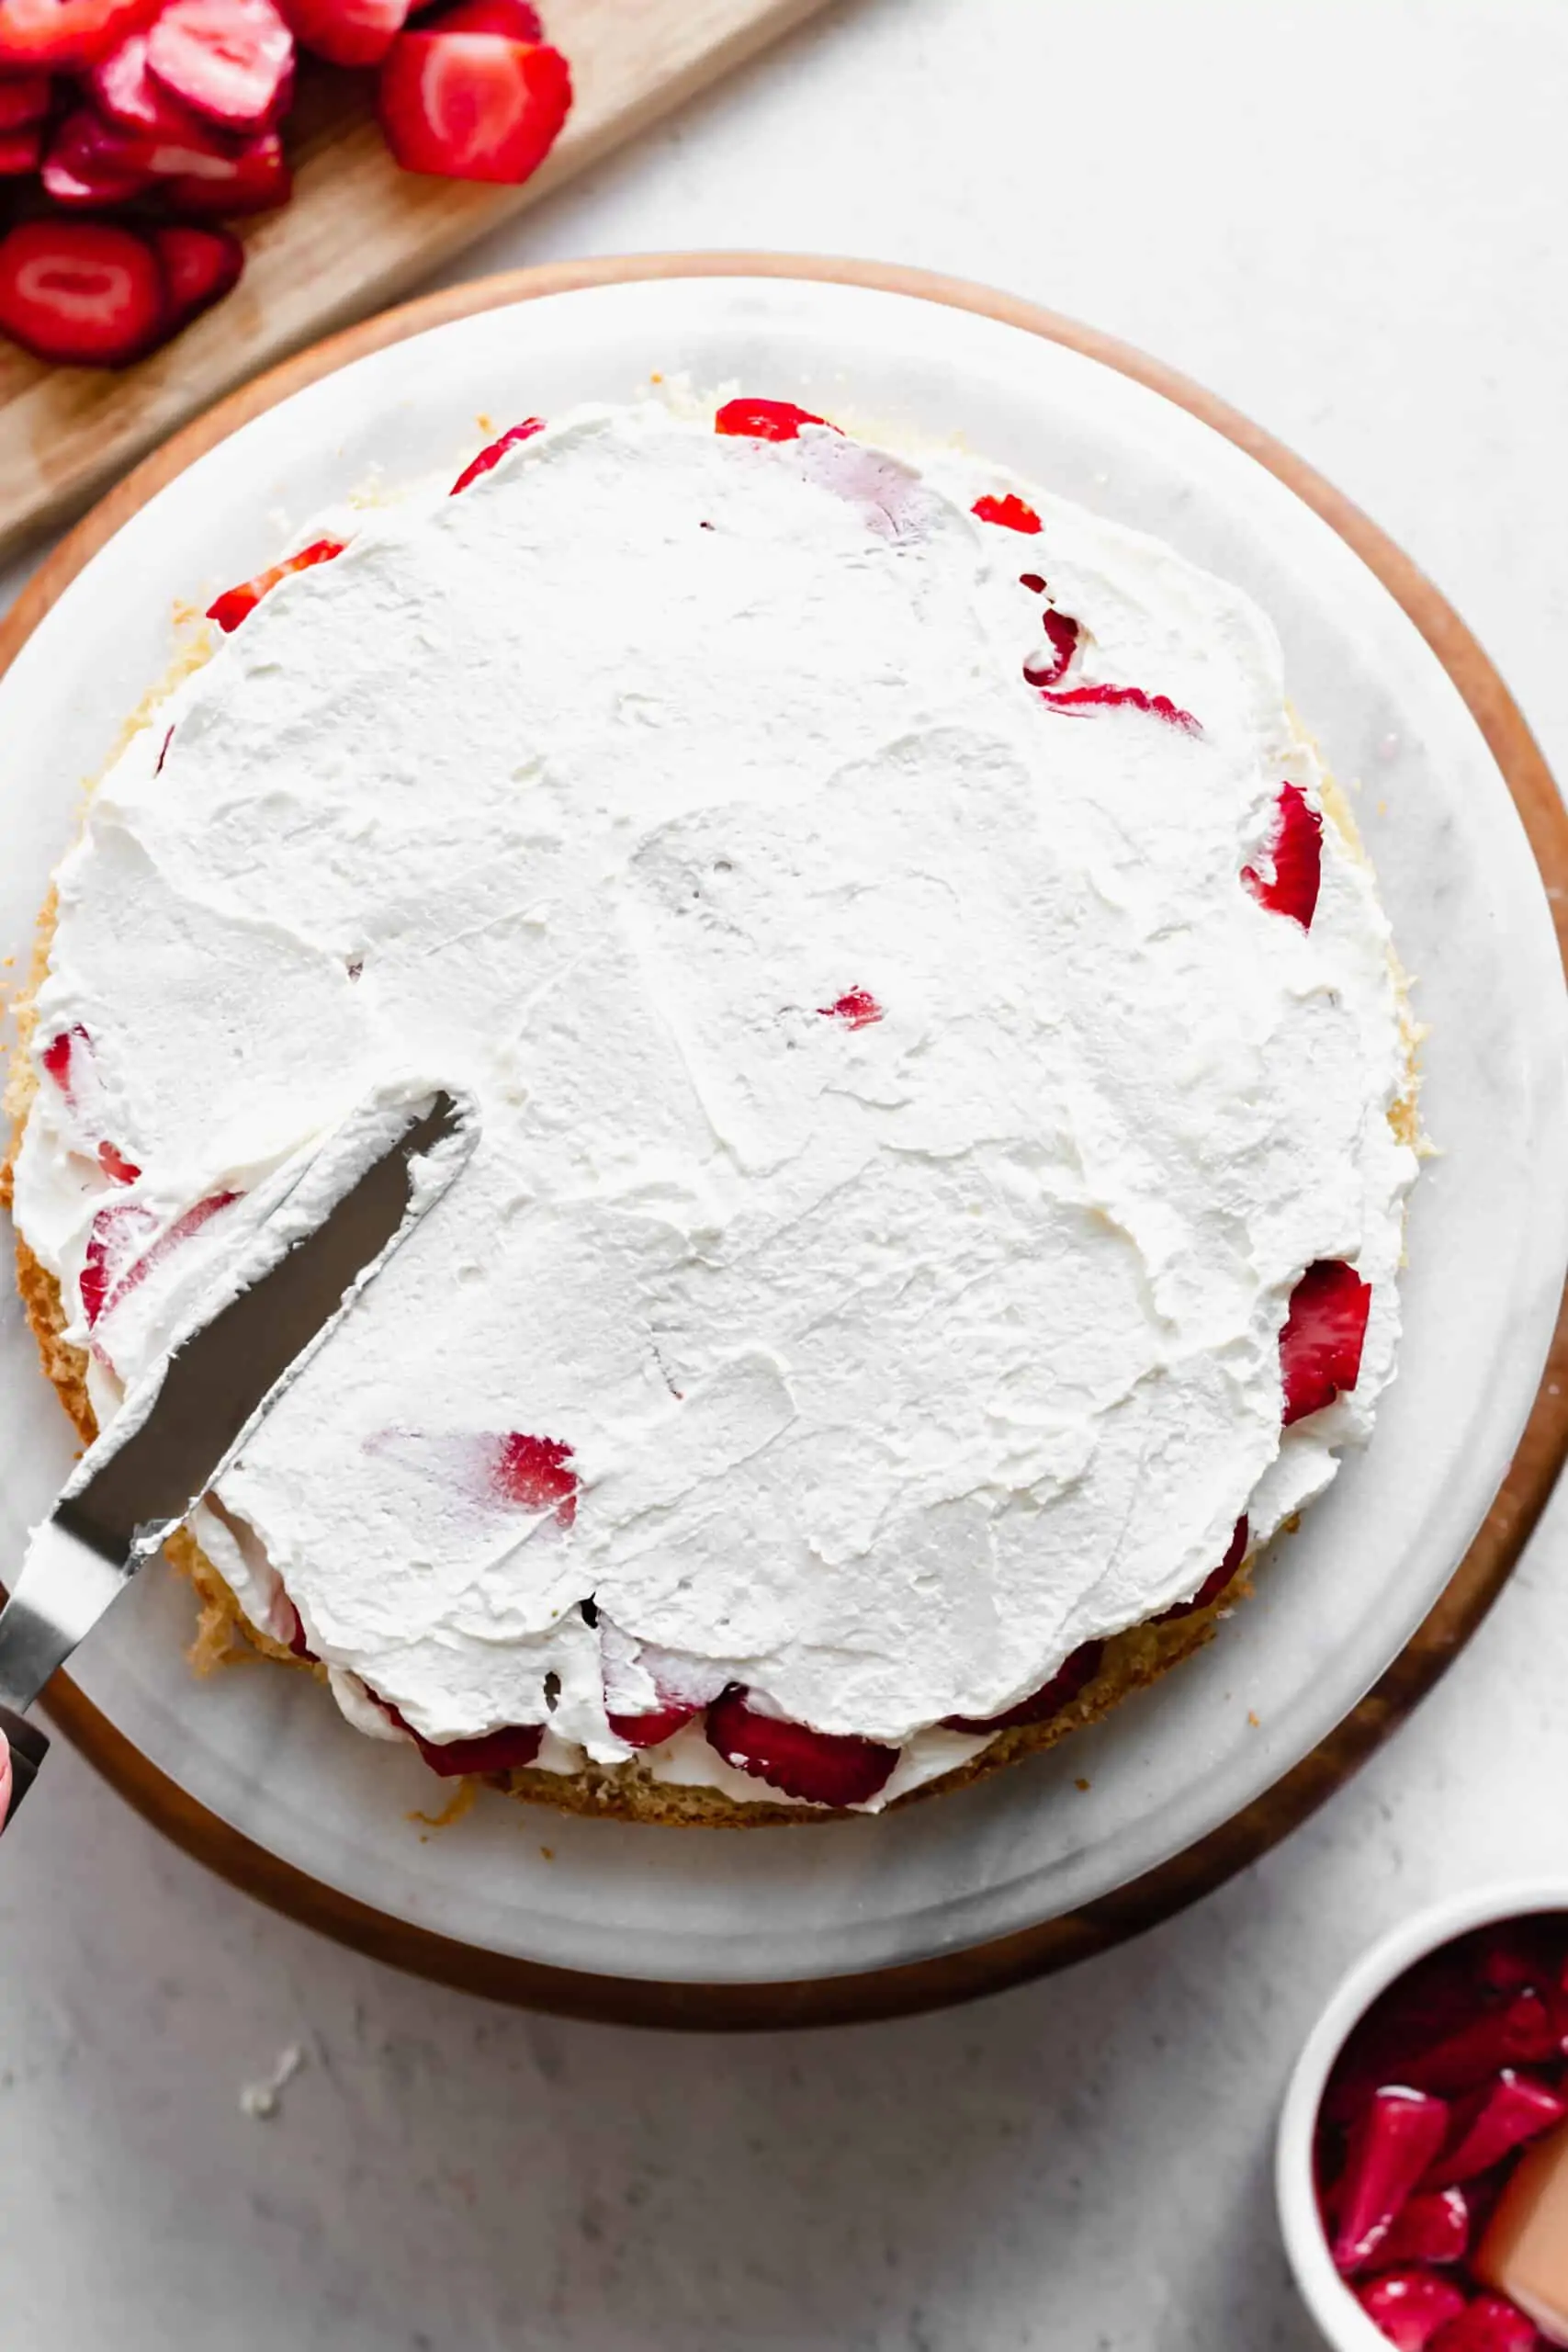 Another layer of whipped cream is added to cover the strawberries.